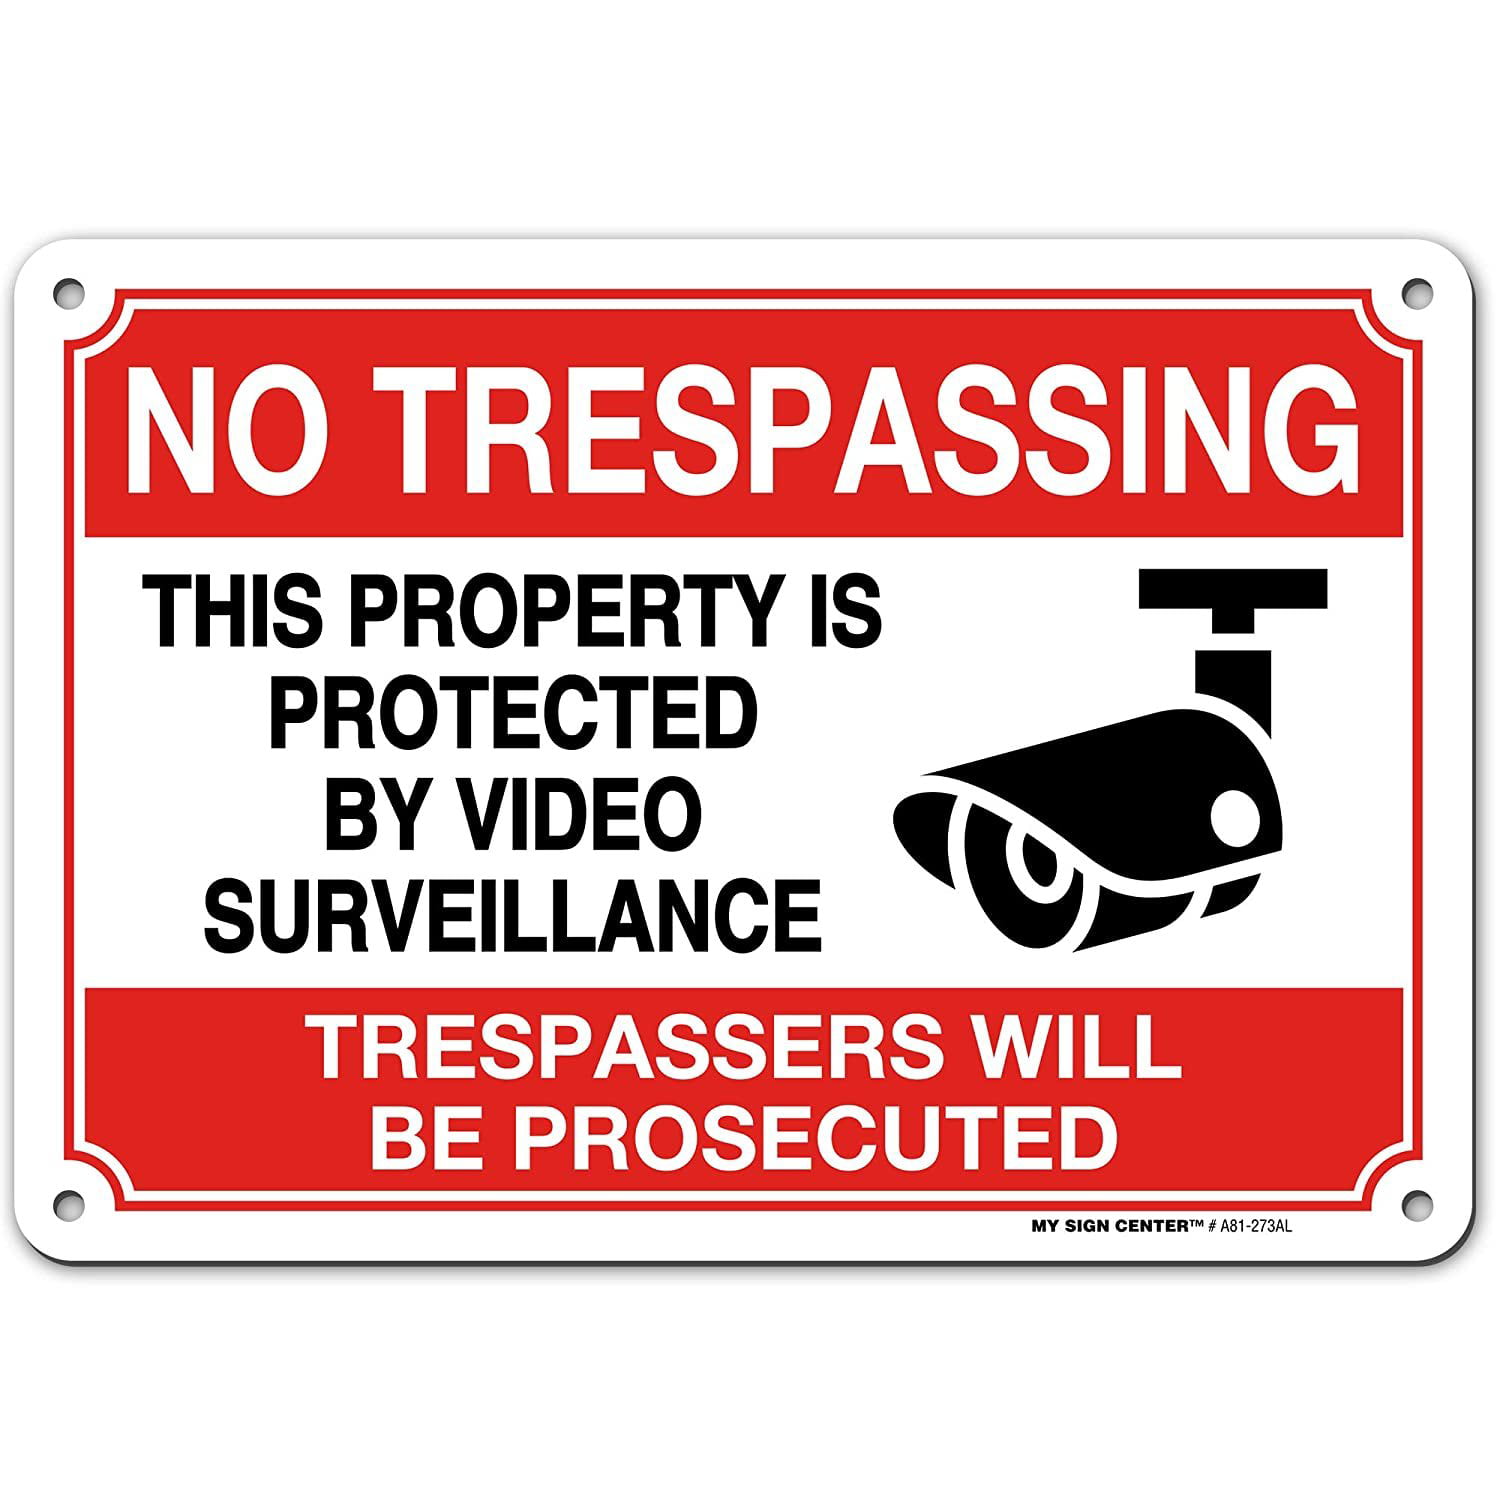 Enlarge Version 10.5 x 8 Inches 0.40 Aluminum Sign Indoor Outdoor with Screws and Zips 4-Pack Video Surveillance Sign UV Protected & Waterproof No Trespassing Metal Reflective Warning Sign